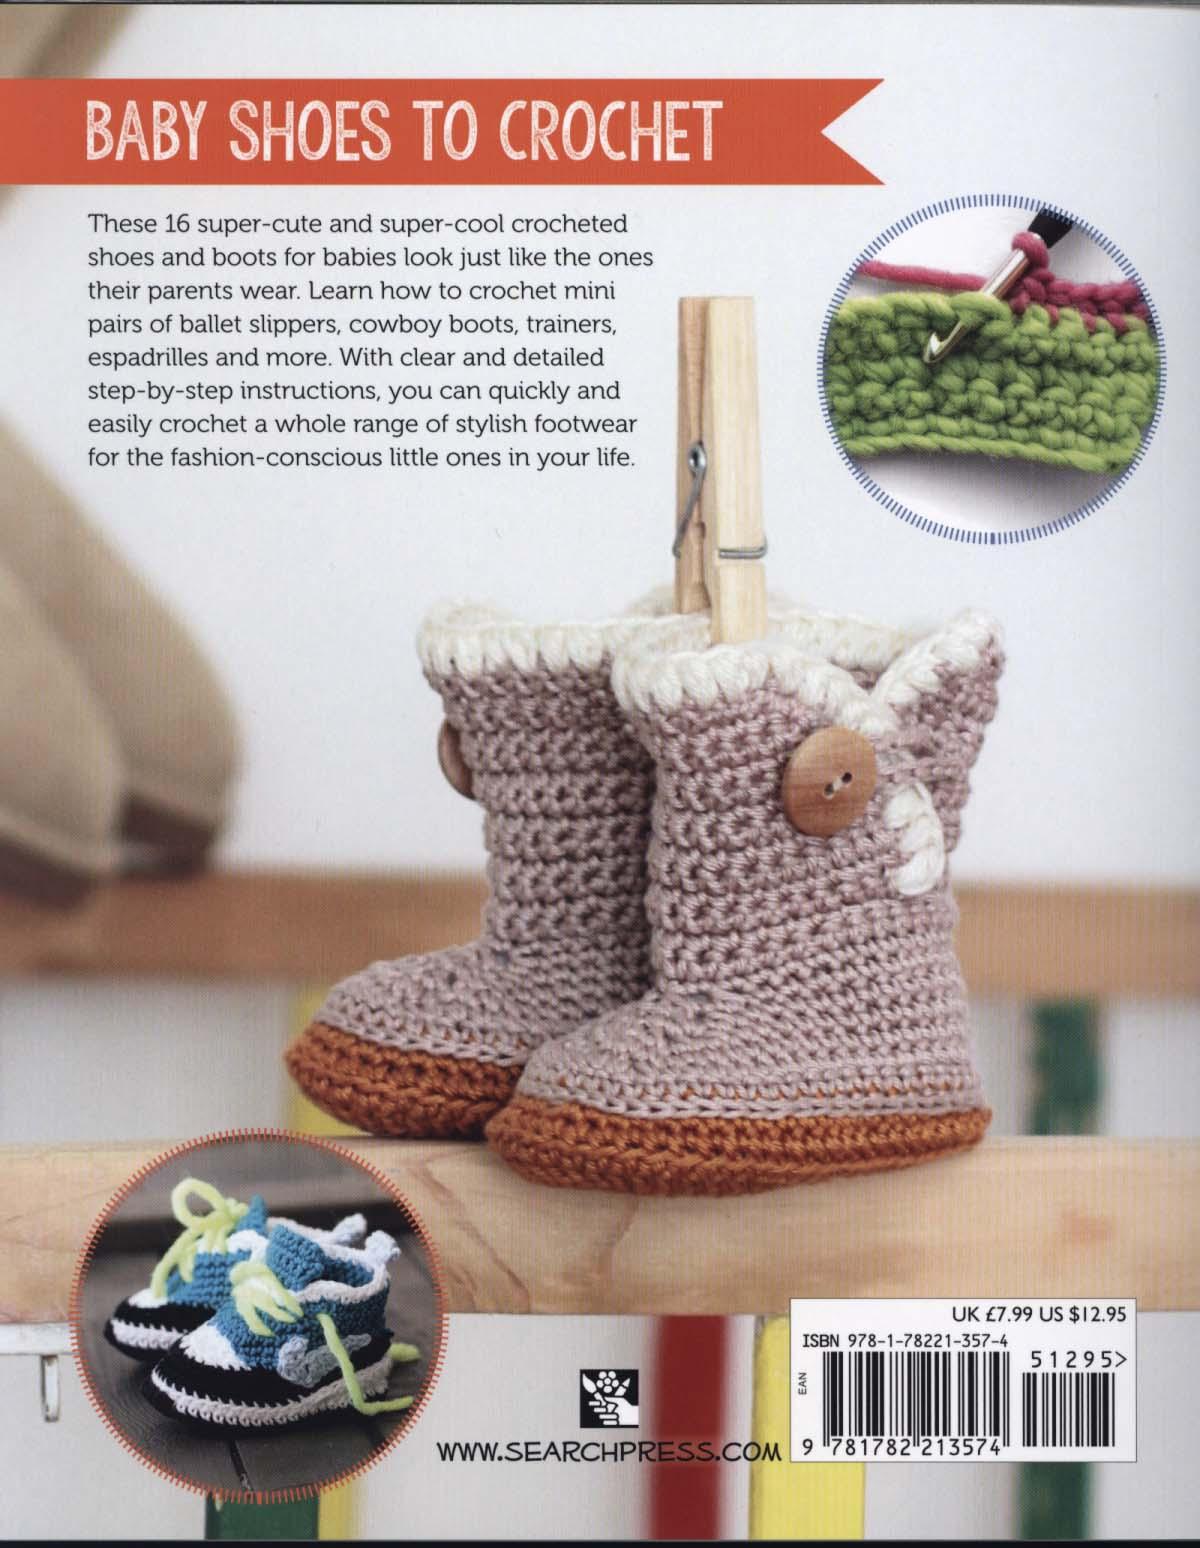 Baby Shoes to Crochet